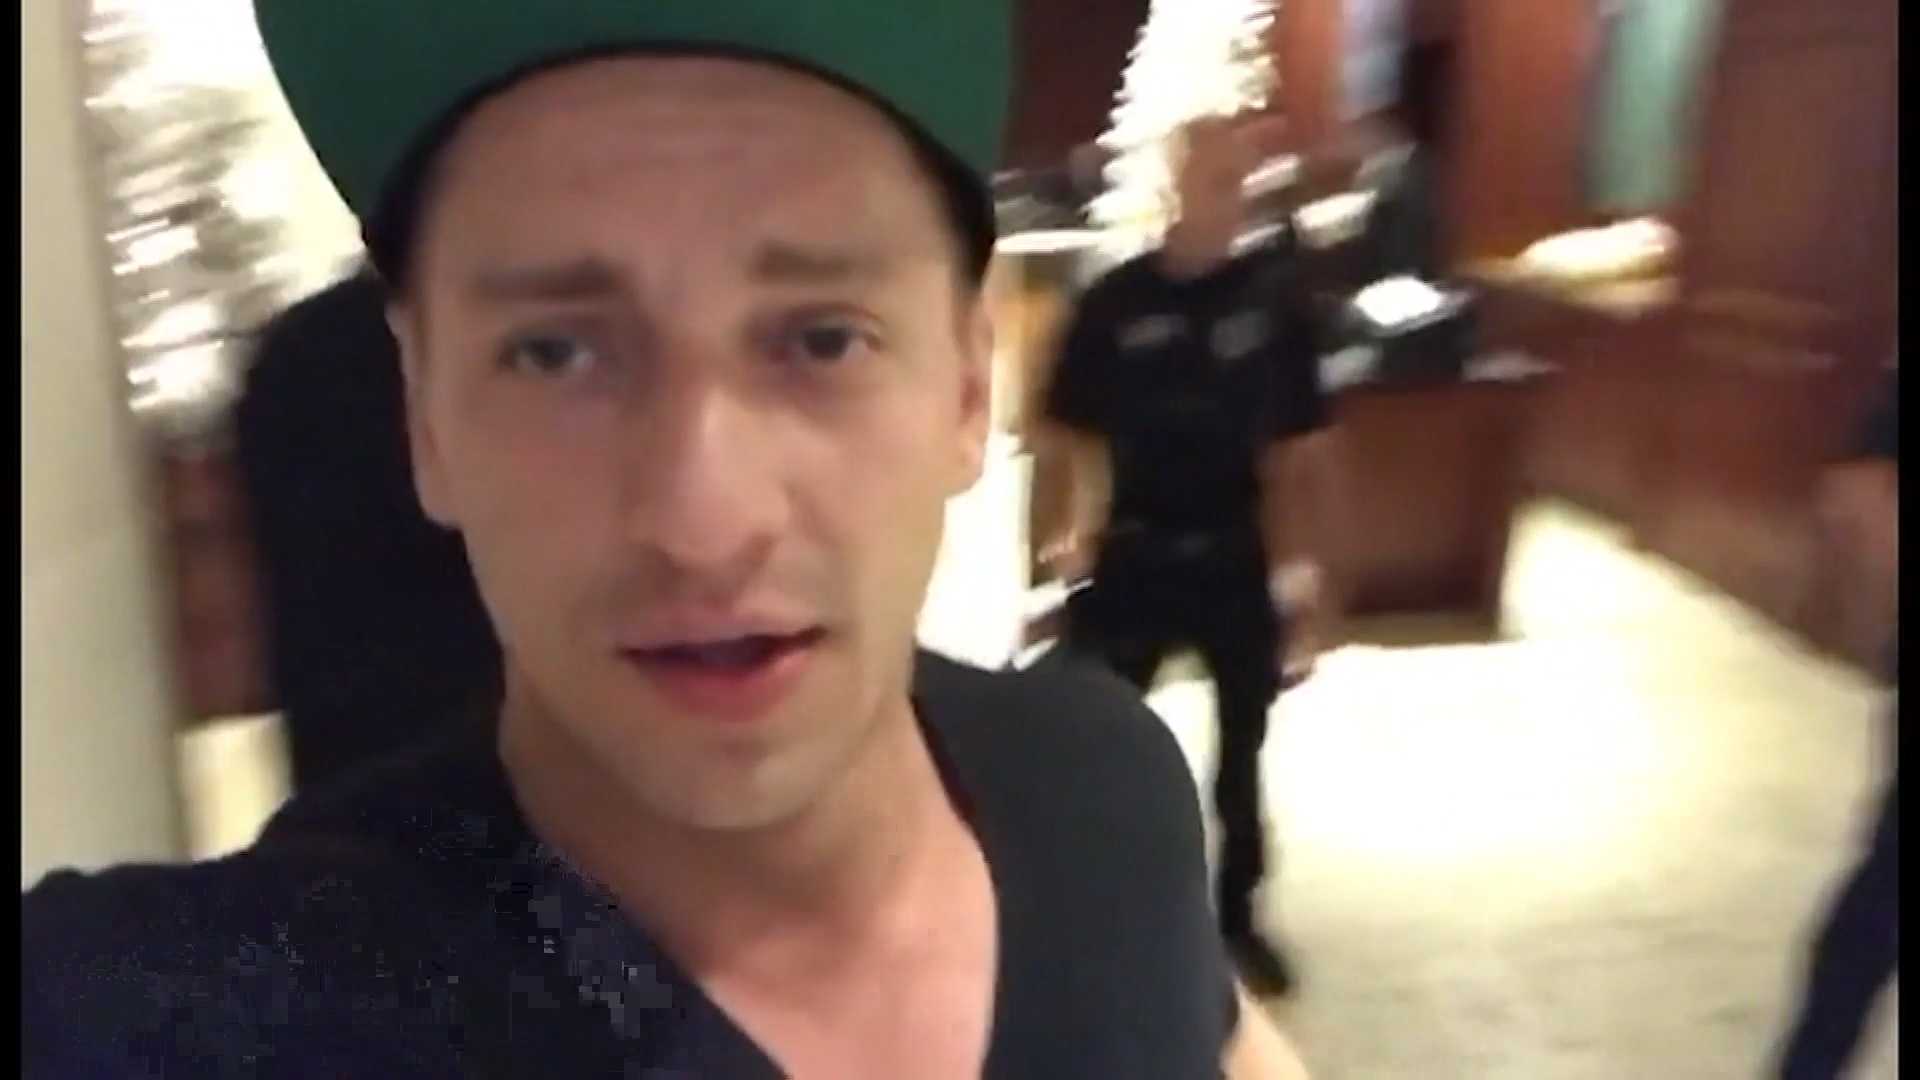 YouTube celebrity fights back after being kicked out of hotel on New Year's Eve